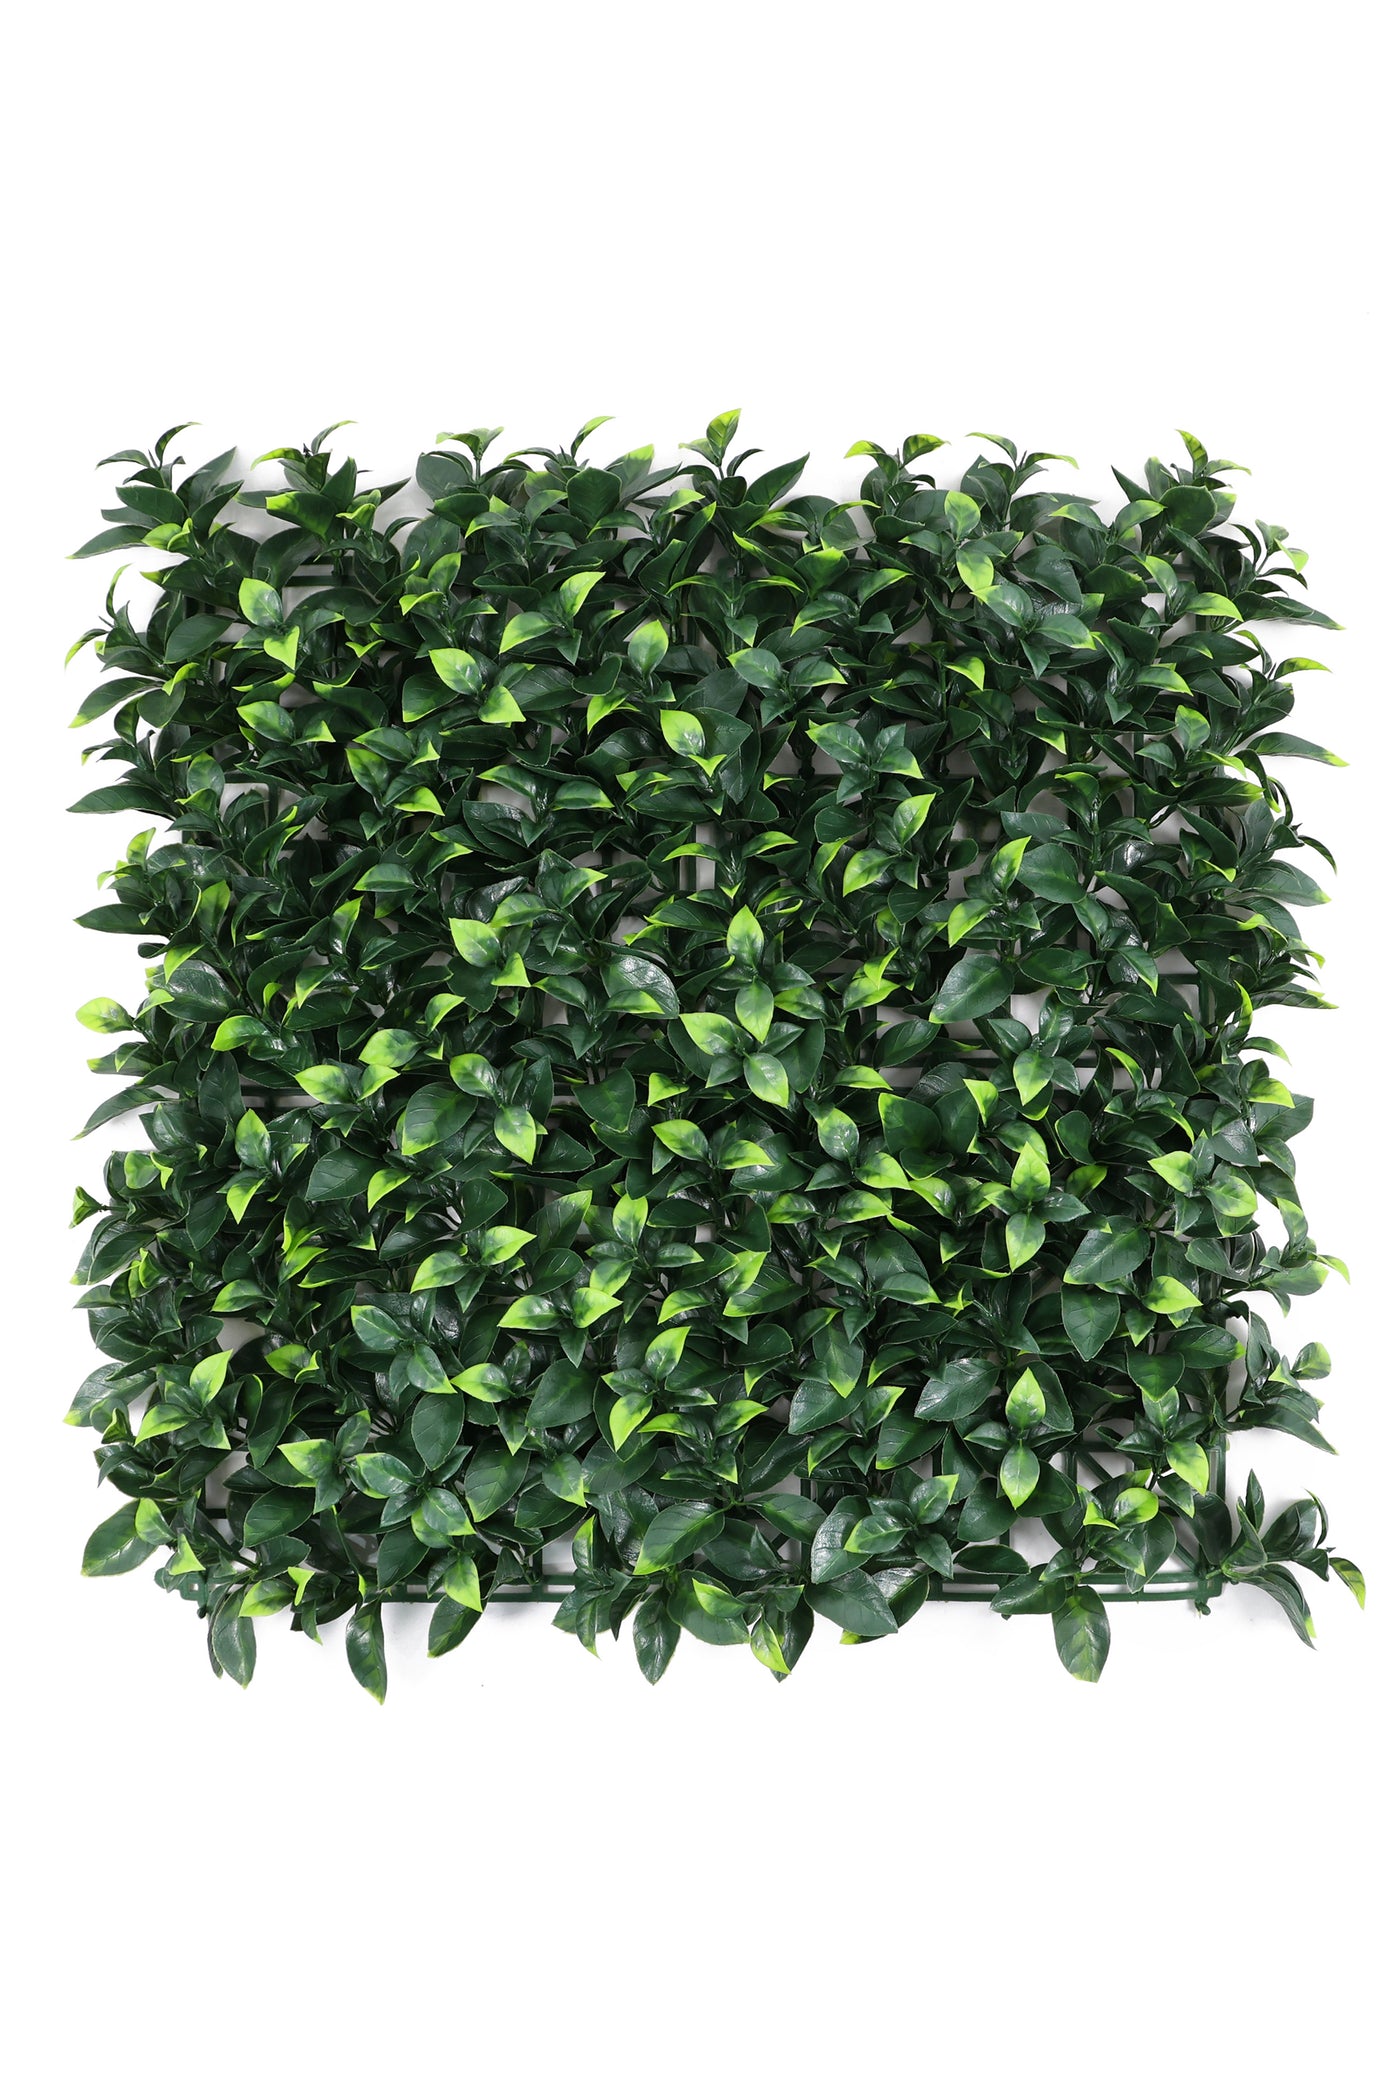 Artificial Green Vertical Garden Tiles for Outdoor and Indoor Use (Pack of 1)